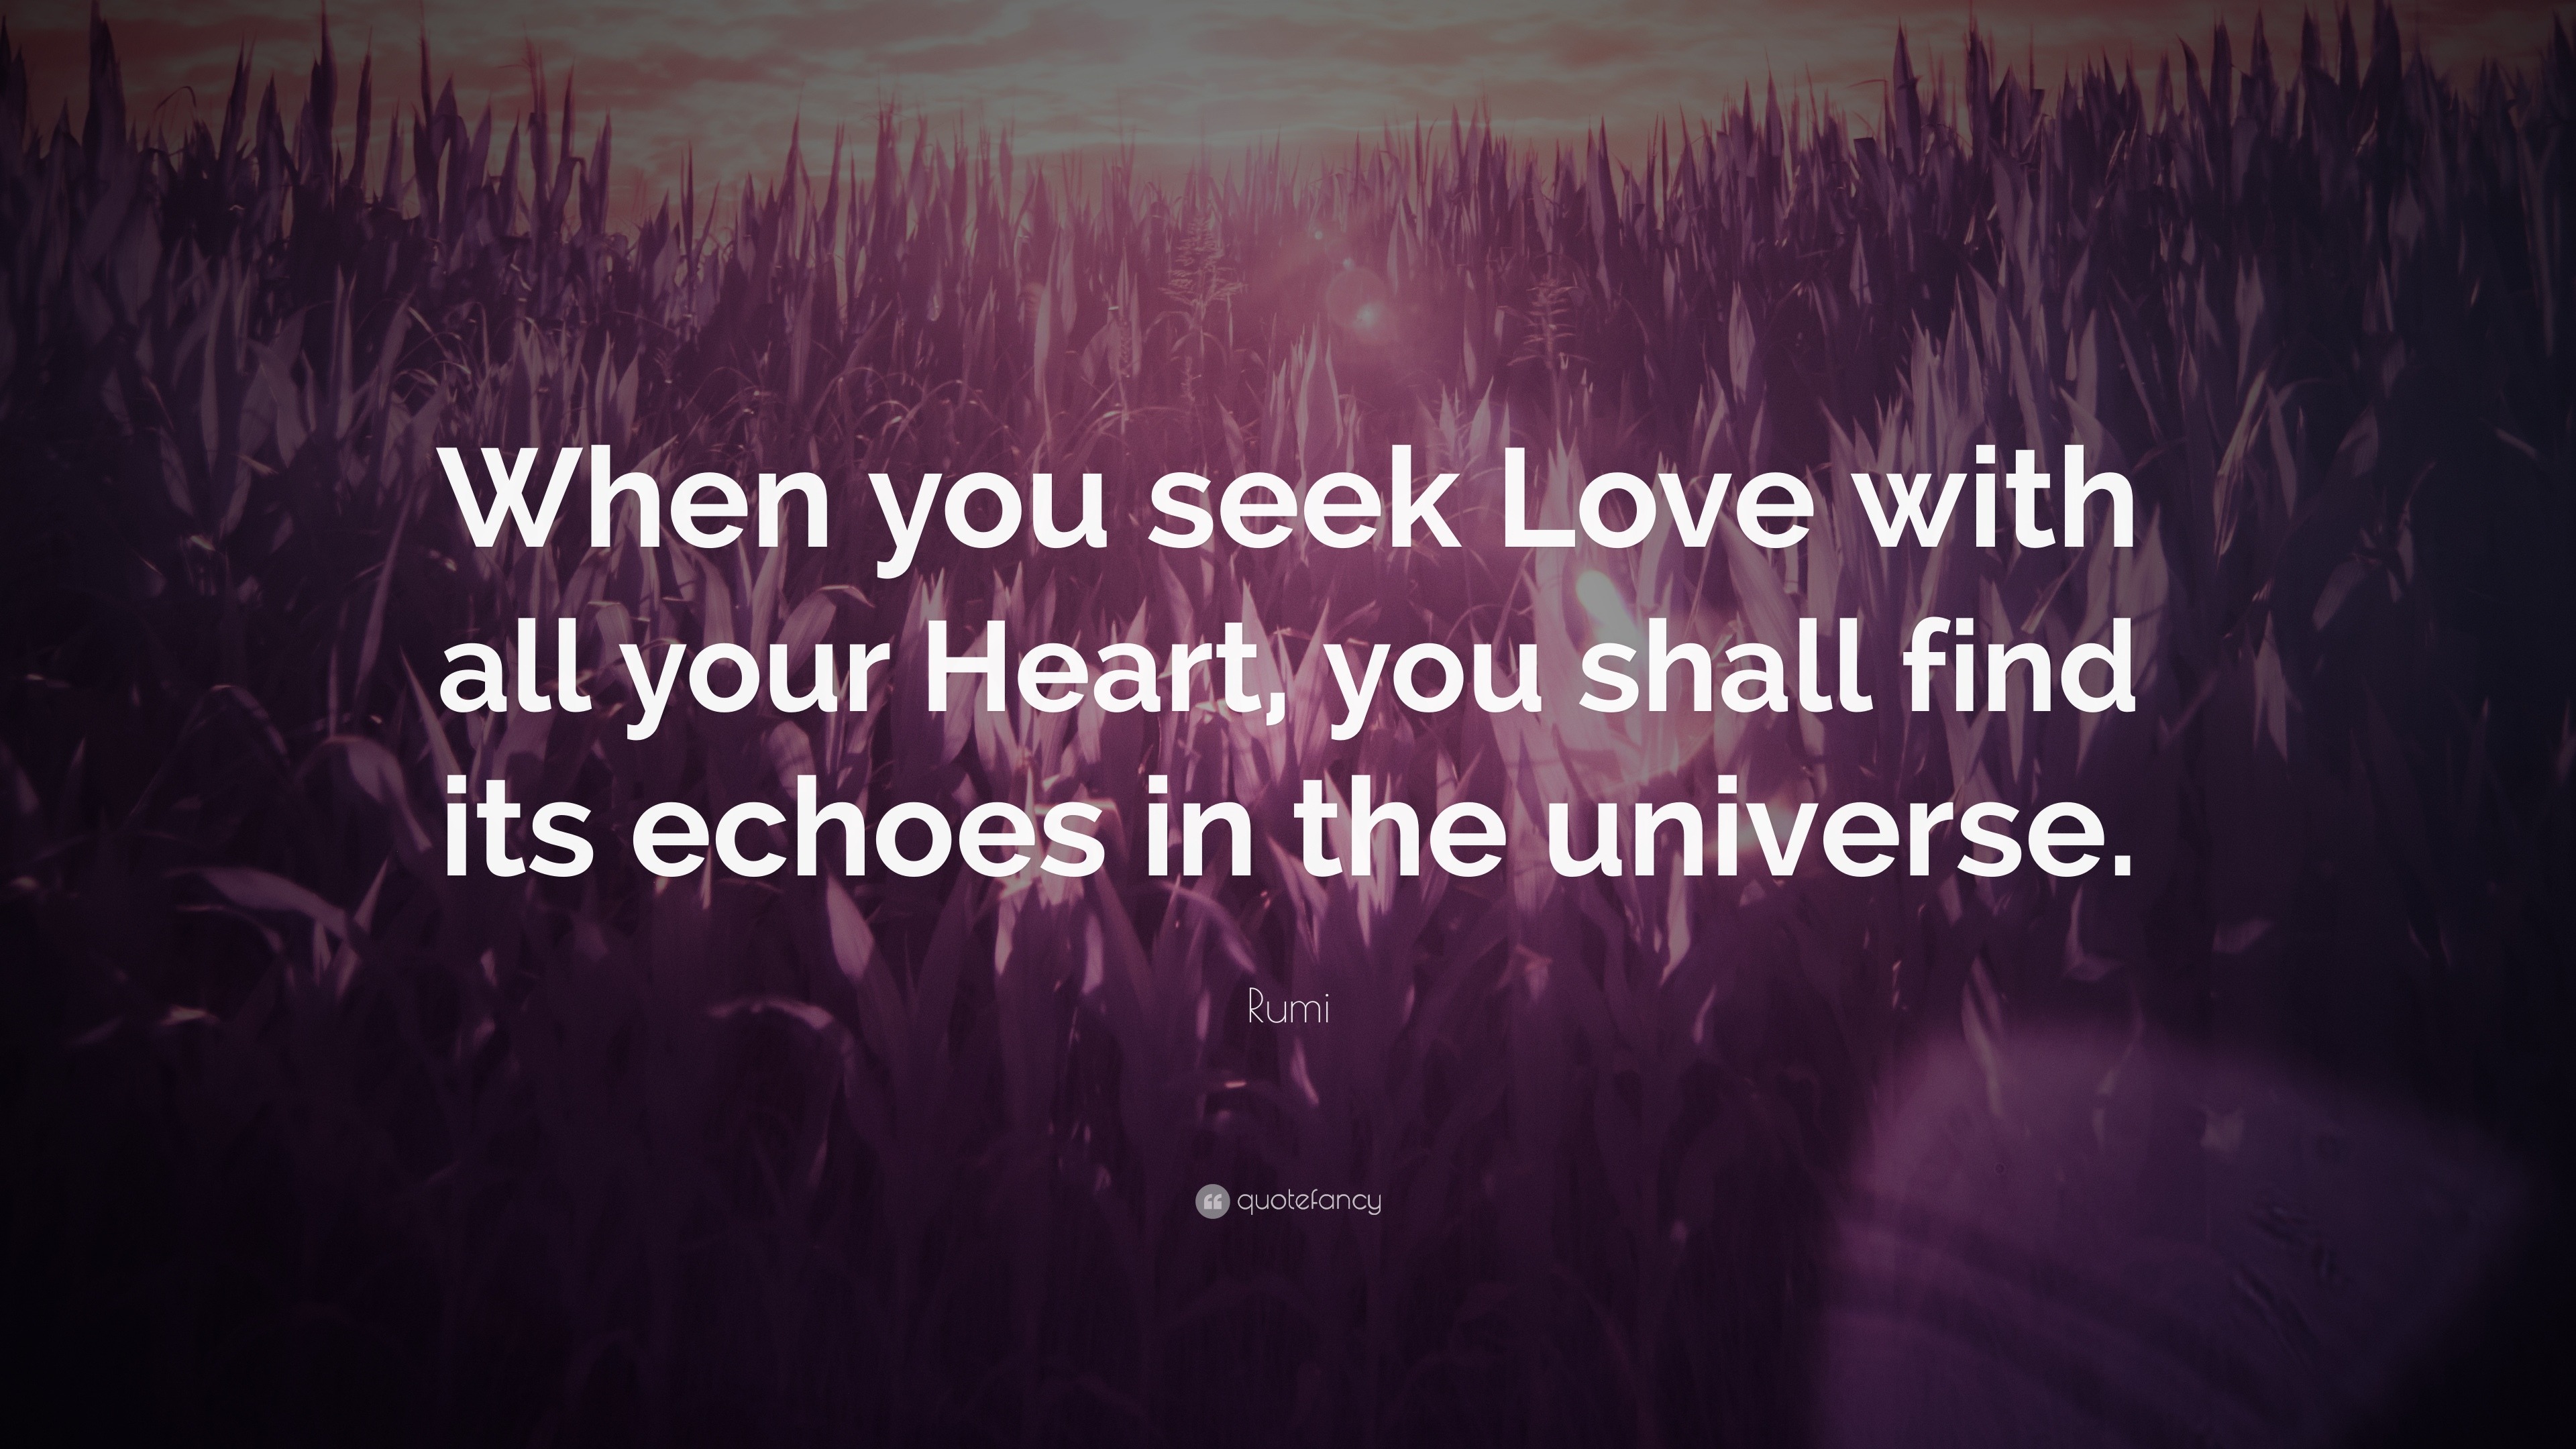 Rumi Quote “When you seek Love with all your Heart you shall find